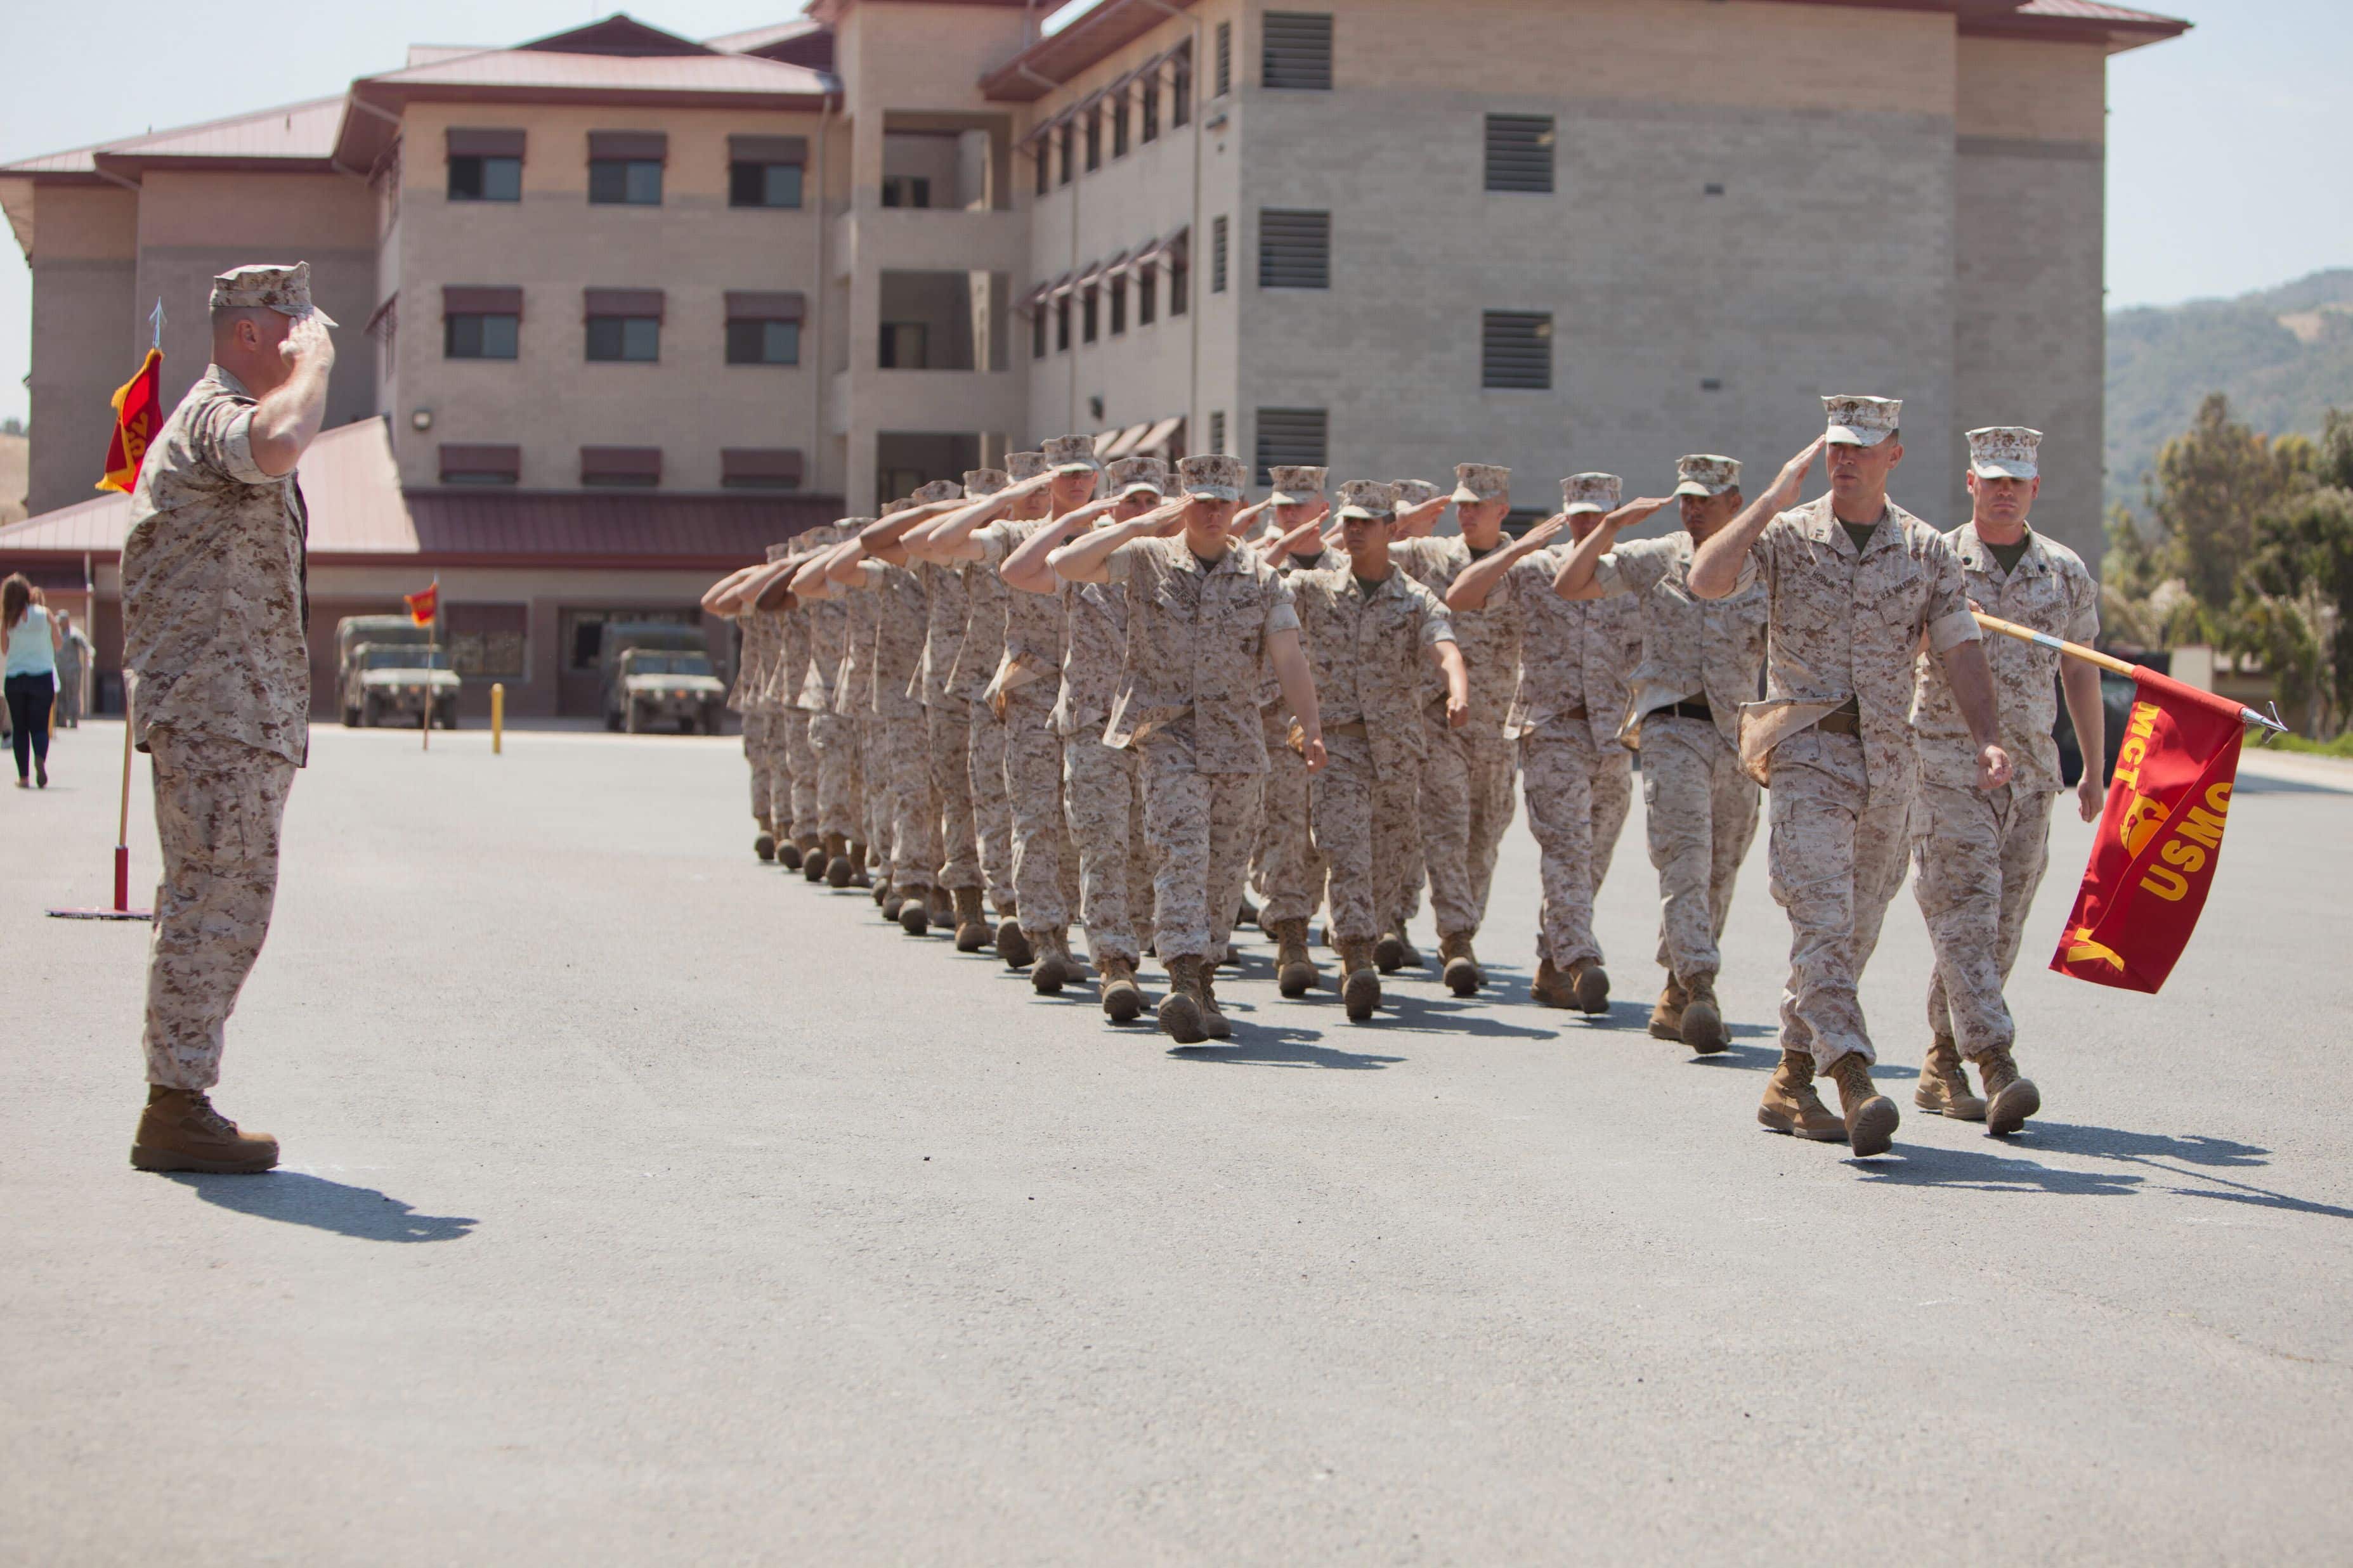 U.S. Marine Corps Lt. Col. William B. Allen IV, Commanding Officer, Marine Combat Training Battalion, School of Infantry-West, salutes during the Pass in Review during a Change of Command Ceremony at Camp Pendleton